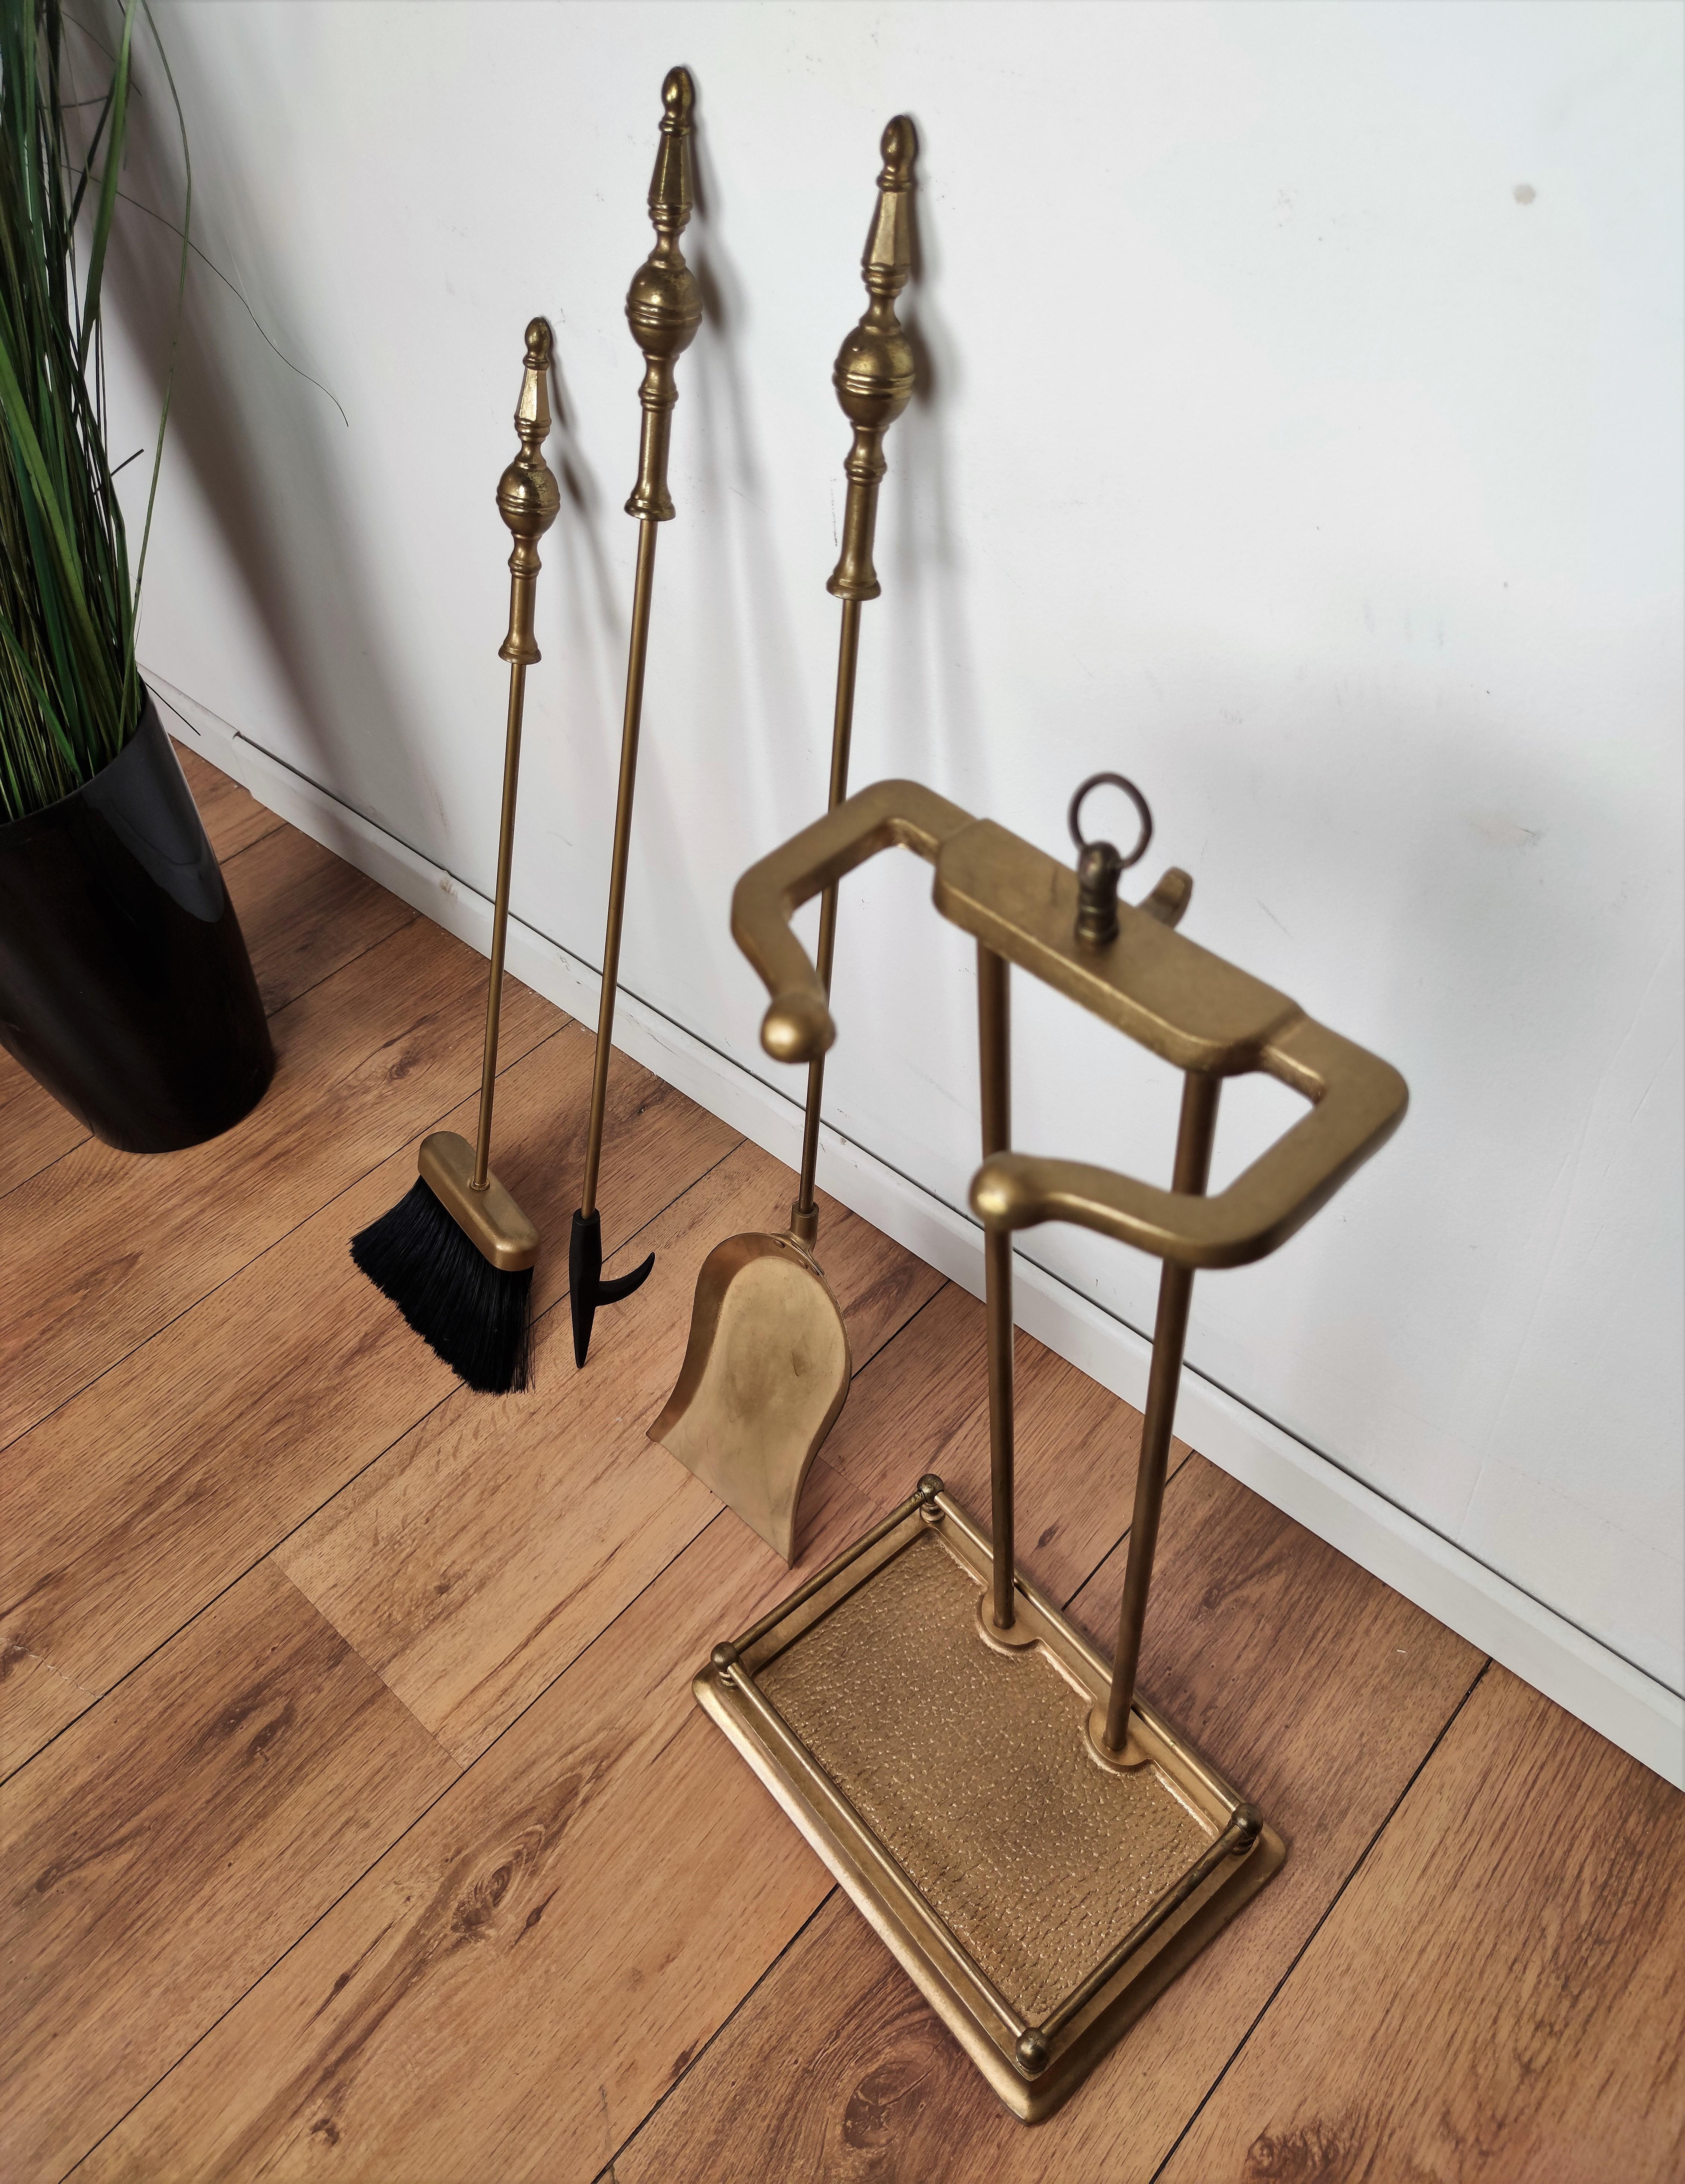 Italian Three-Piece Brass Vintage Fire Tool Set with Stand